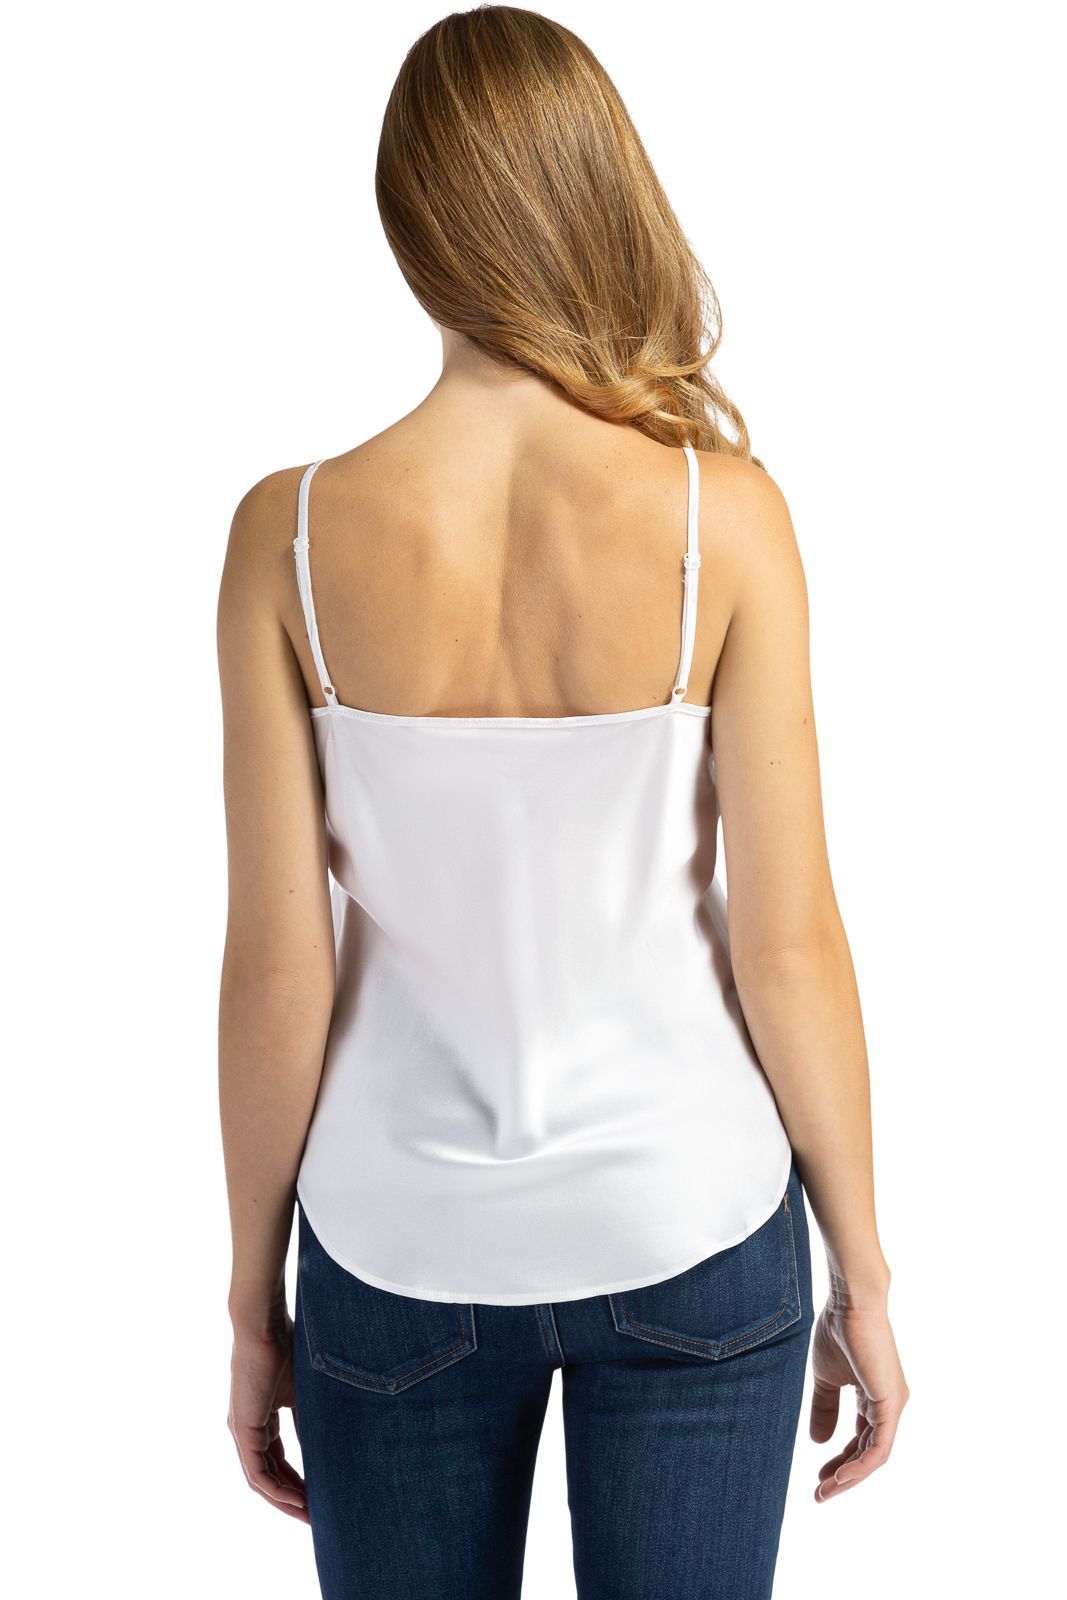 Mulberry Silk Camisole Top on Sale